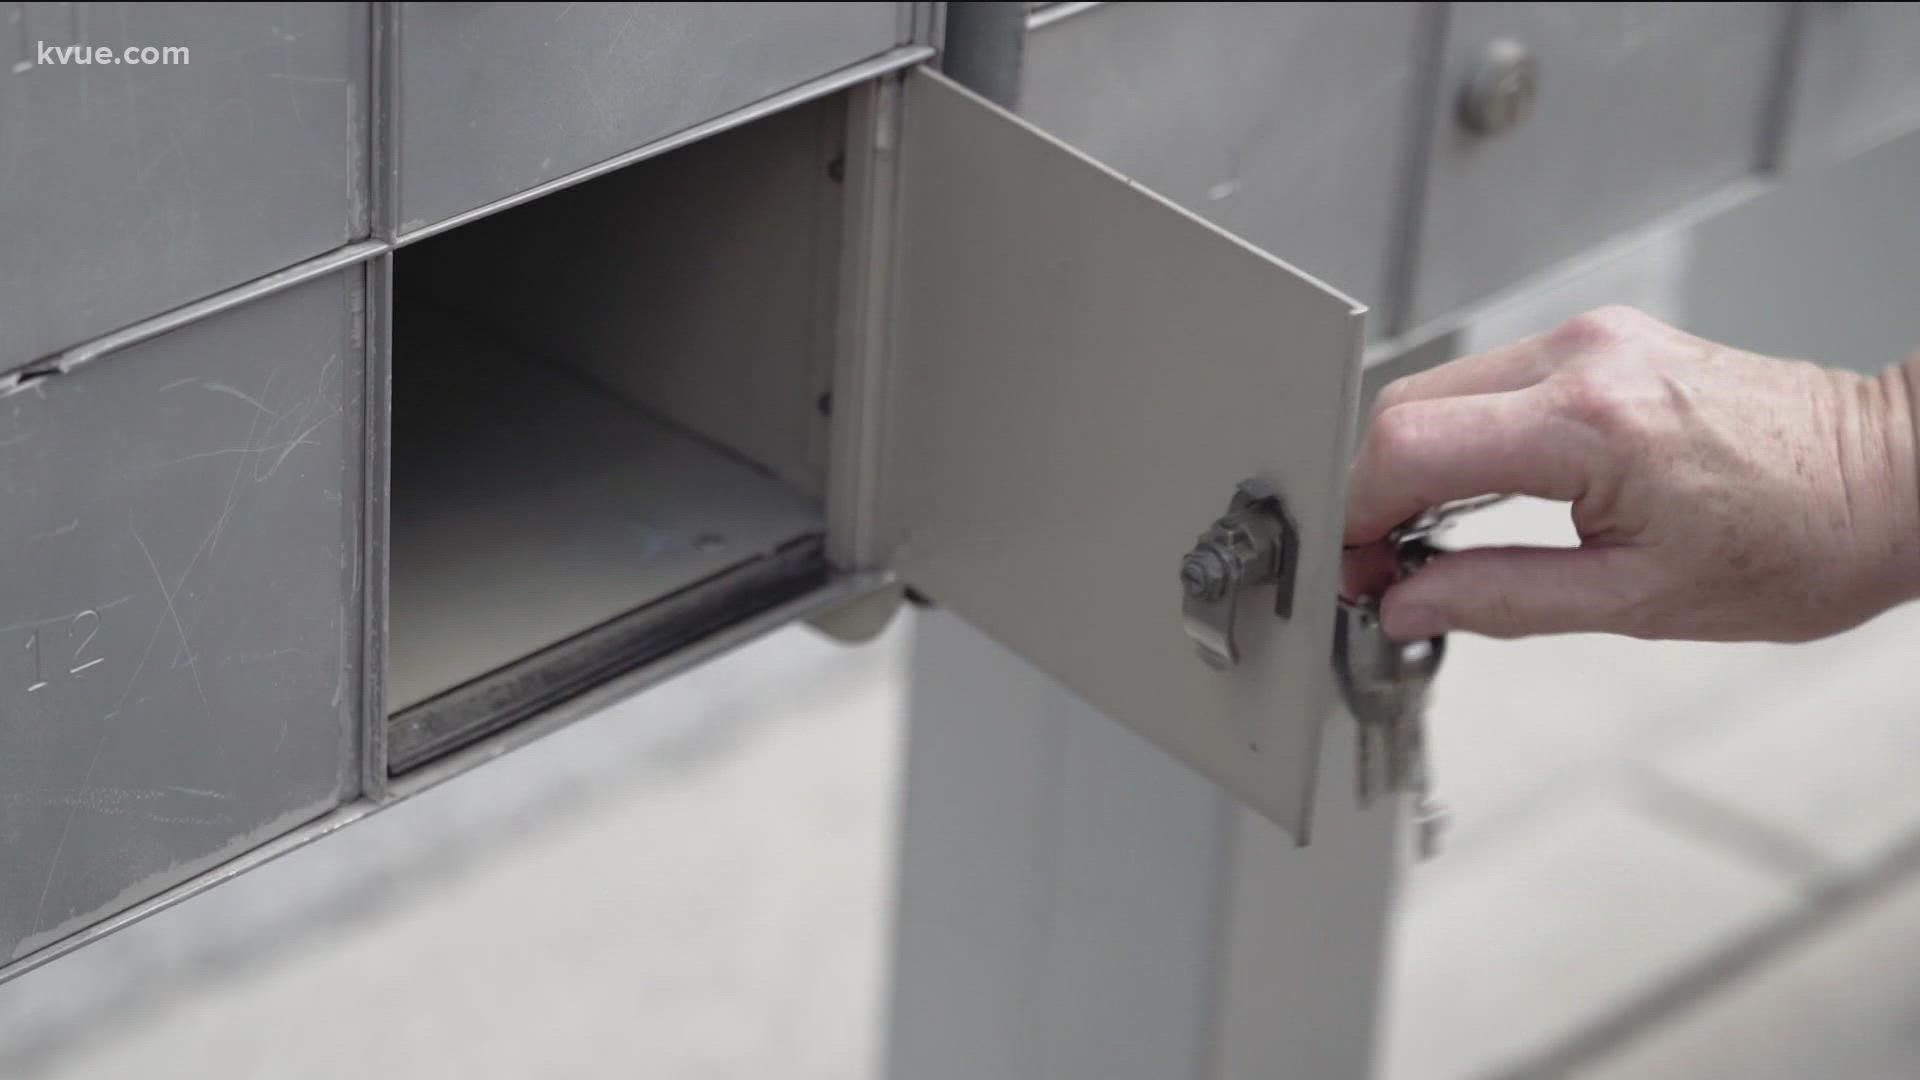 If you rely on the U.S. Postal Service to maintain your mailbox, expect long delays if thieves break in.